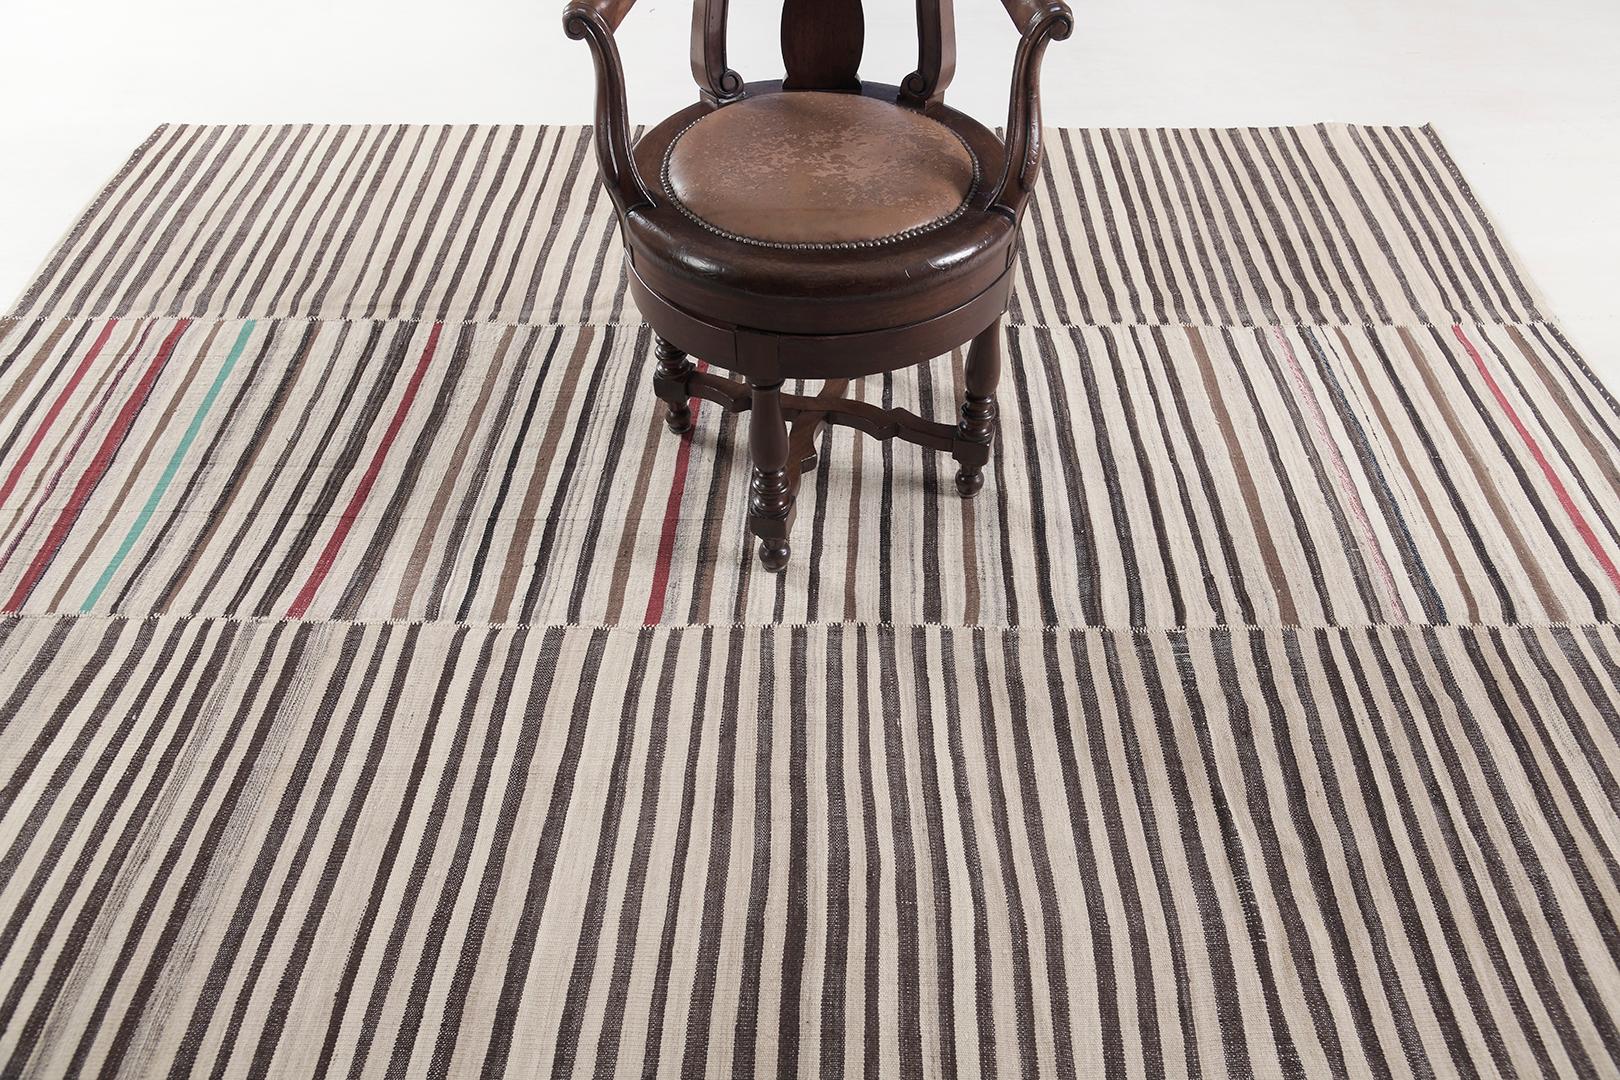 This Persian Jejim Kilim is a banded flat weave with alternating hues of green, red, ivory, khaki, and clay brown in multi-column stripes. Persian flatweaves are made up of some of the best wool and weaved exceptionally to create interesting